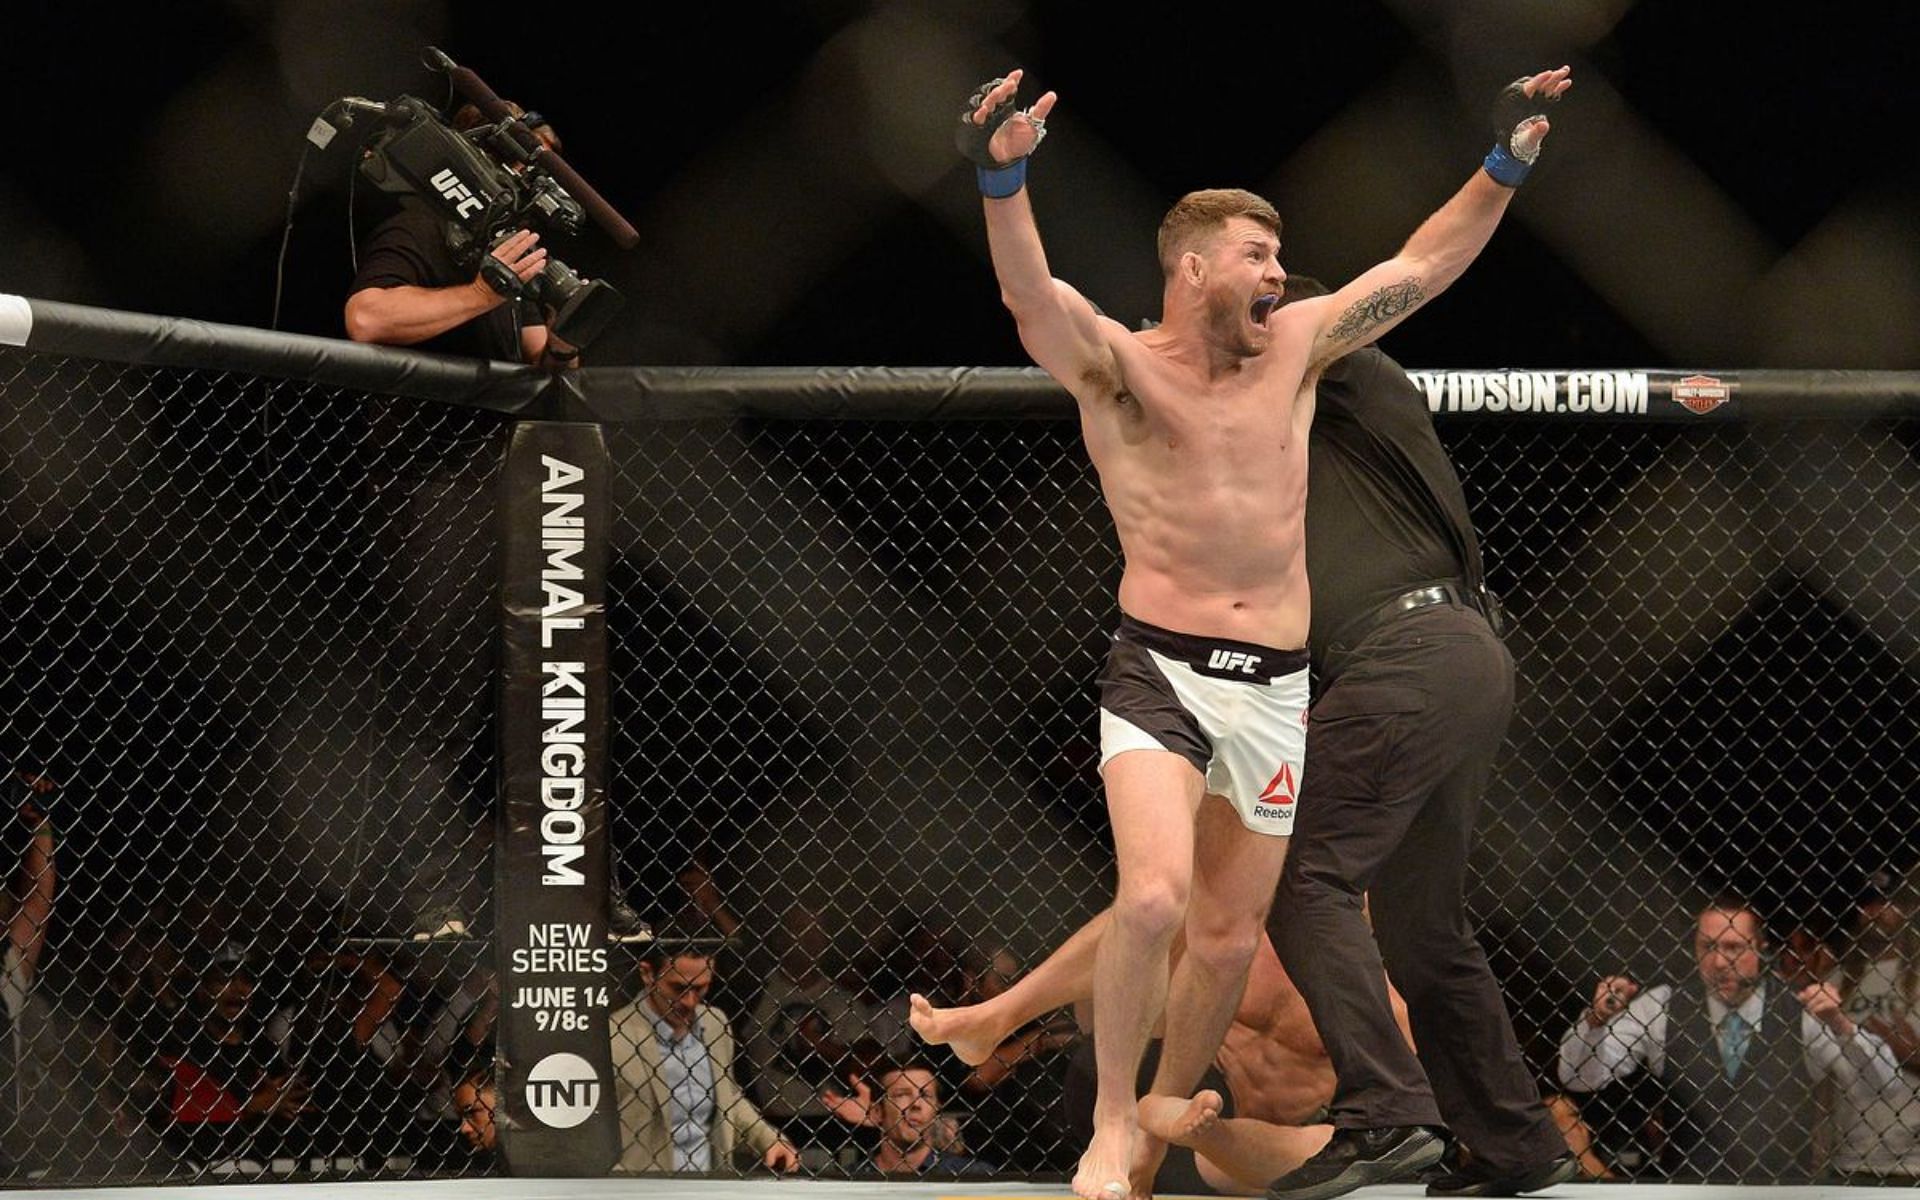 Michael Bisping was firmly written off prior to his middleweight title victory in 2016